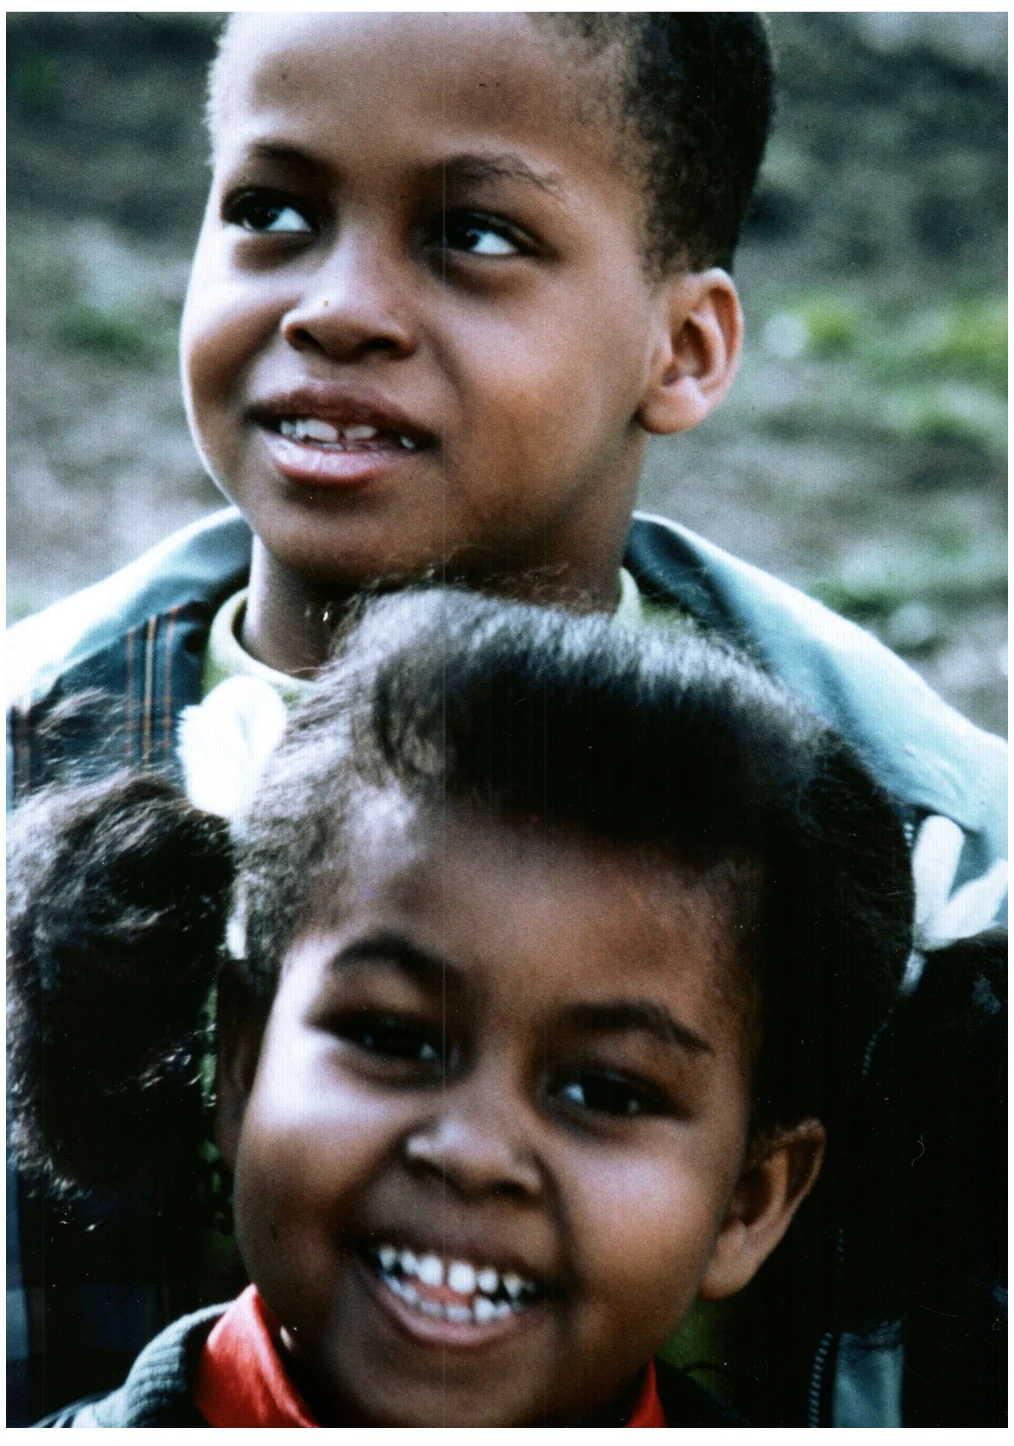 A portrait of Craig and Michelle Robinson when they were kids.